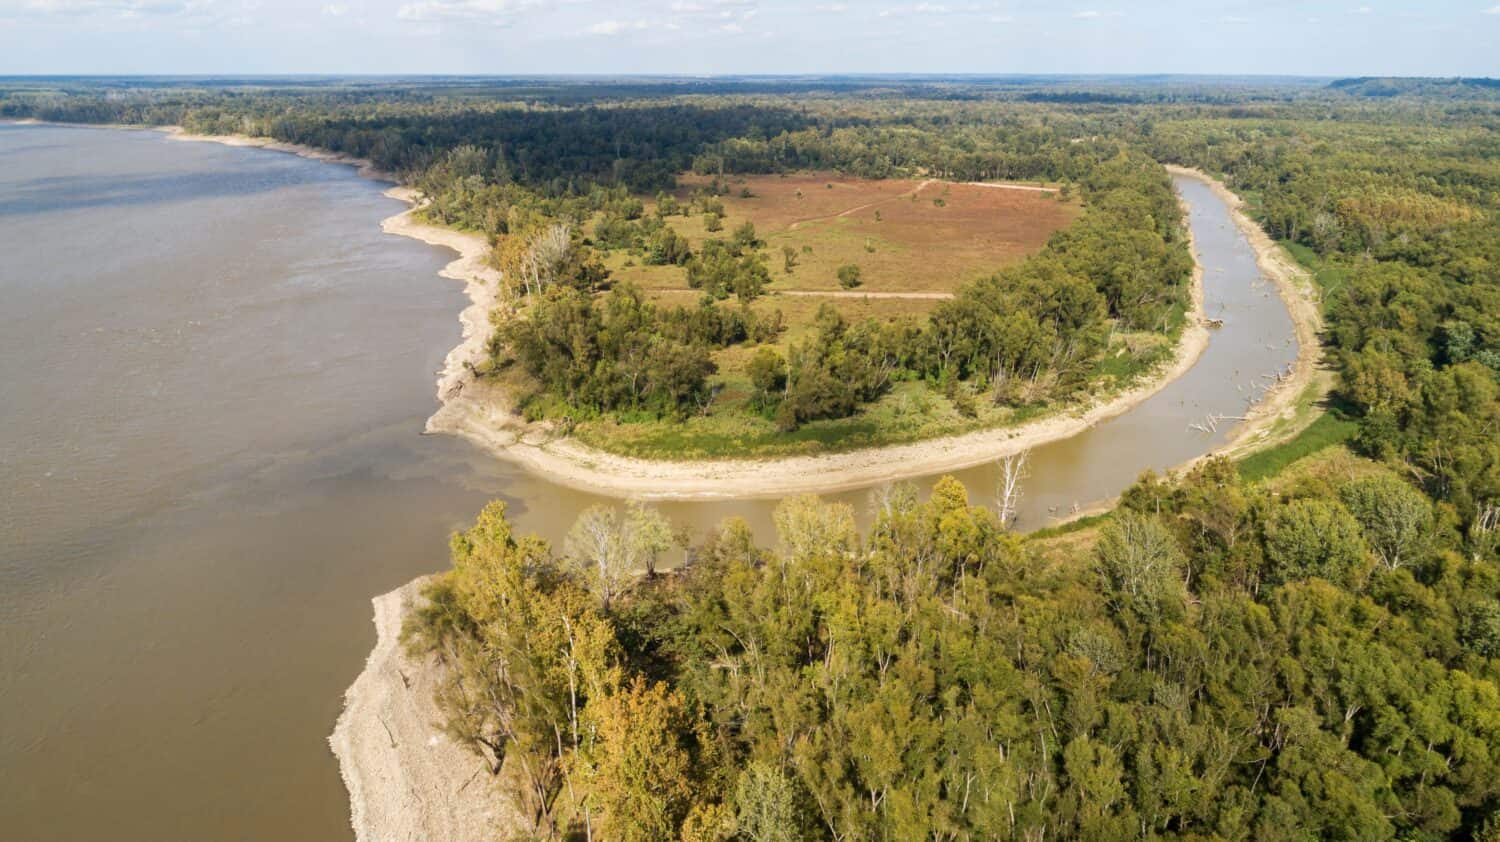 An image of the Big Black River, a tributary of the Mississippi River, meeting the Mississippi River near Grand Gulf, Mississippi.